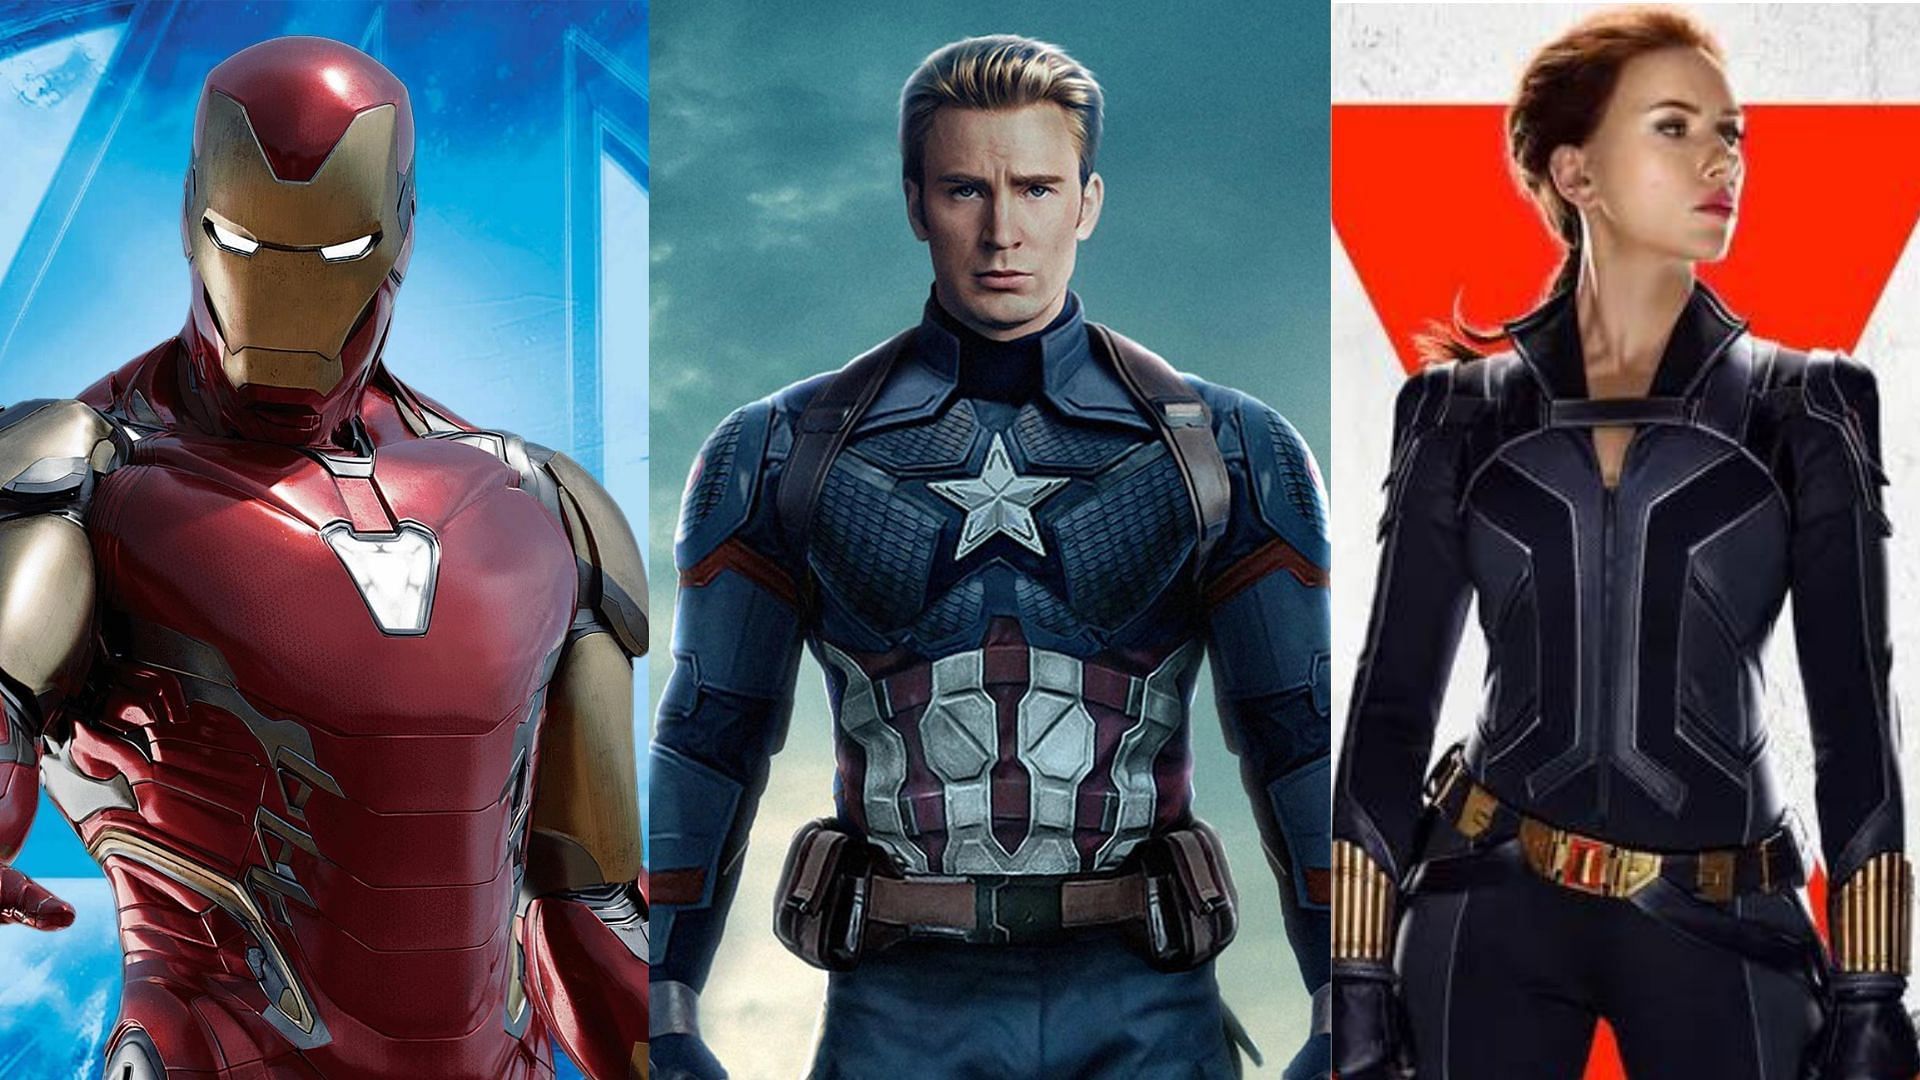 Iron Man, Captain America and Black Widow (images via Marvel)